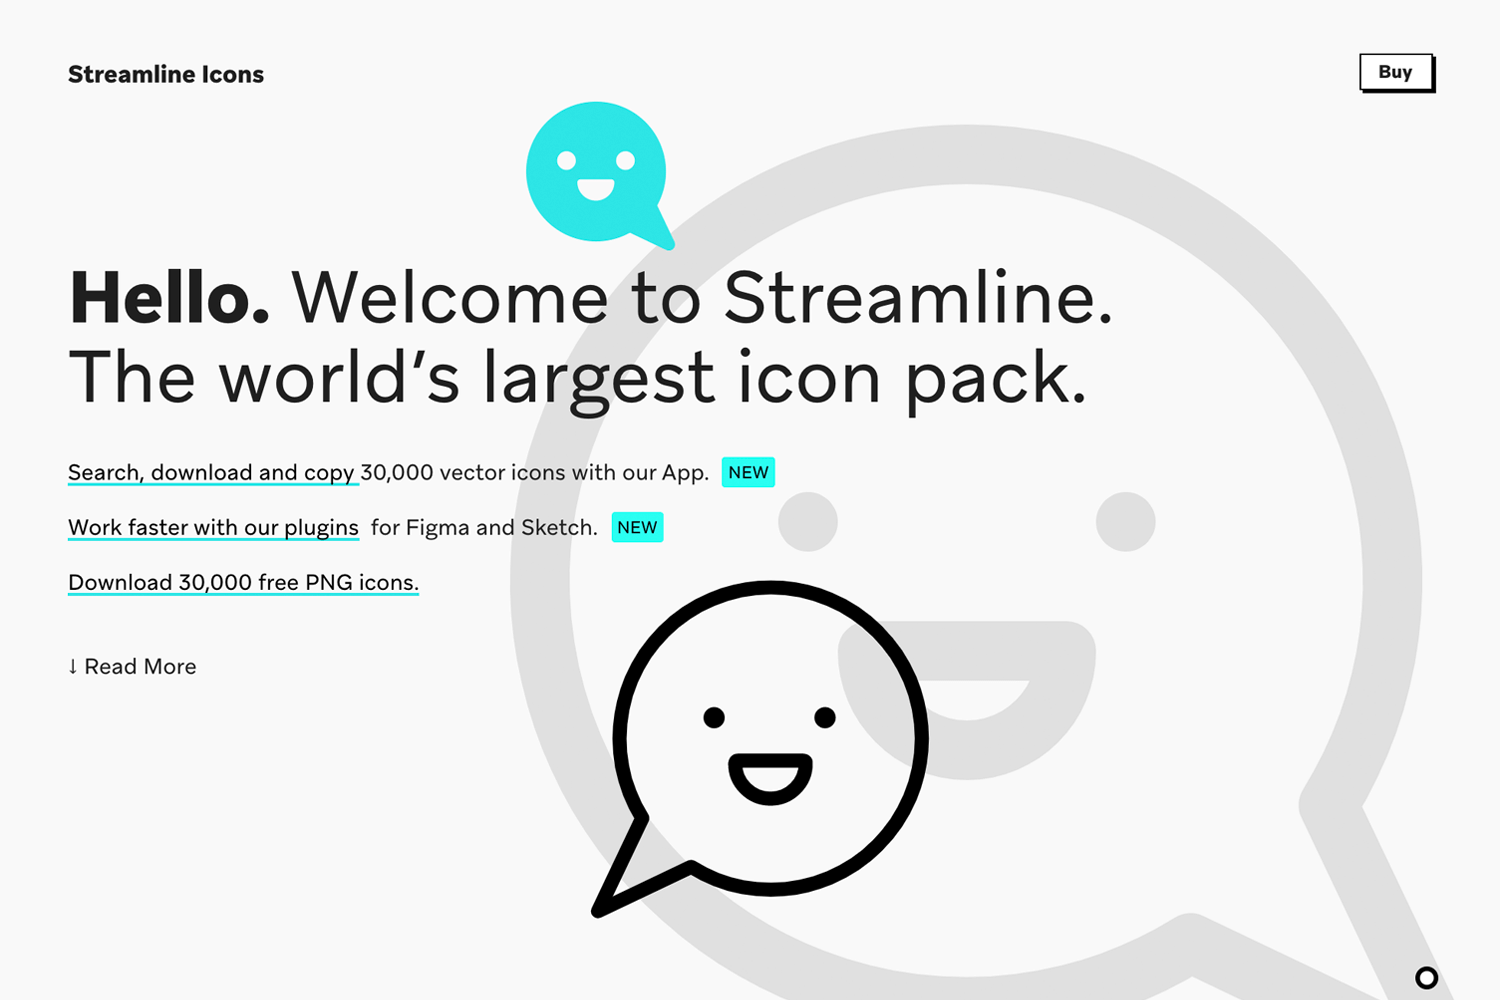 Free website icons to download - Streamline icons